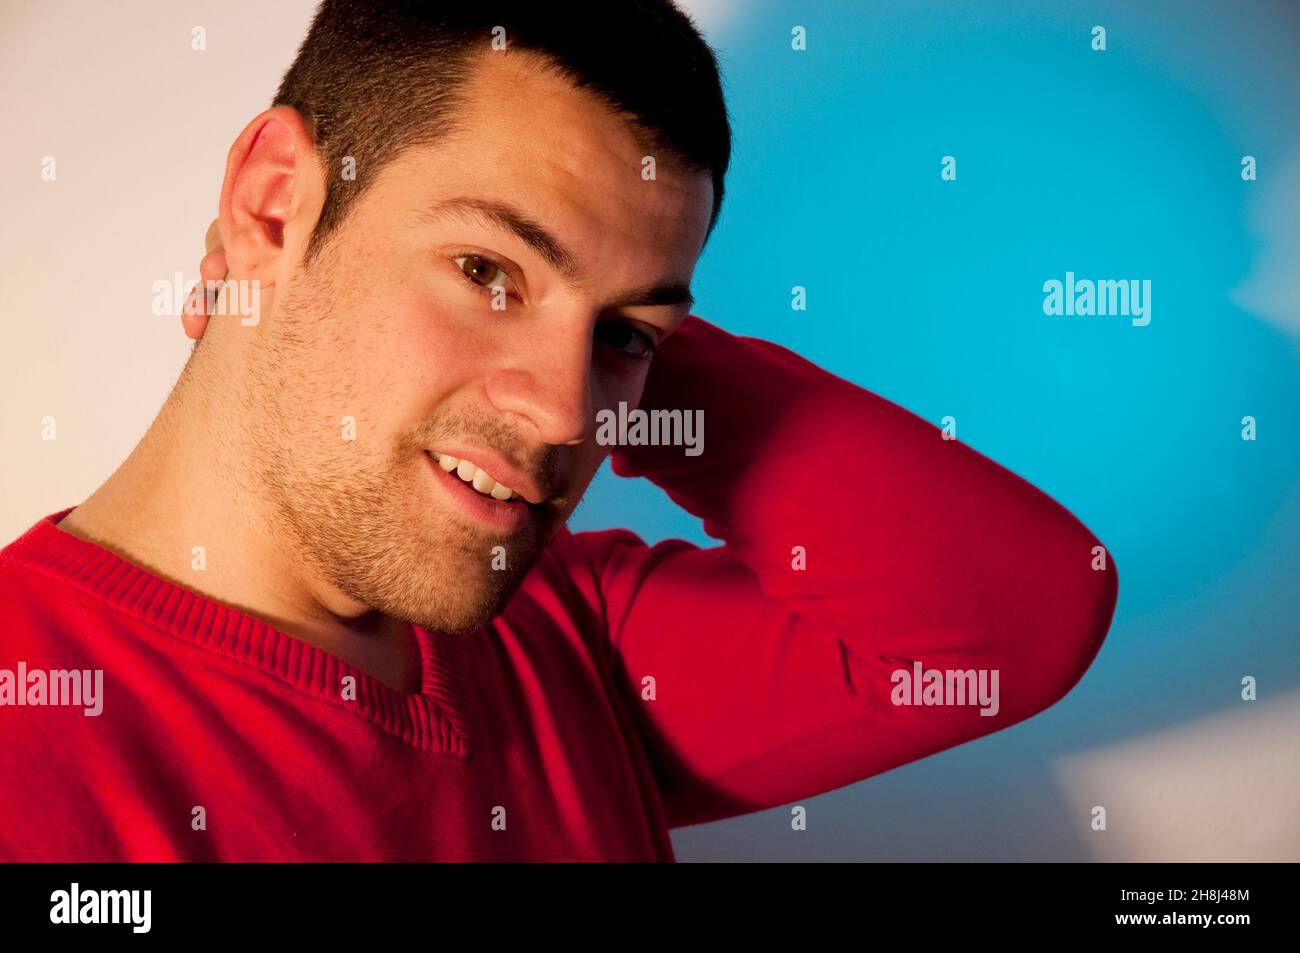 Young man, hand on head, looking camera. Close view. Stock Photo